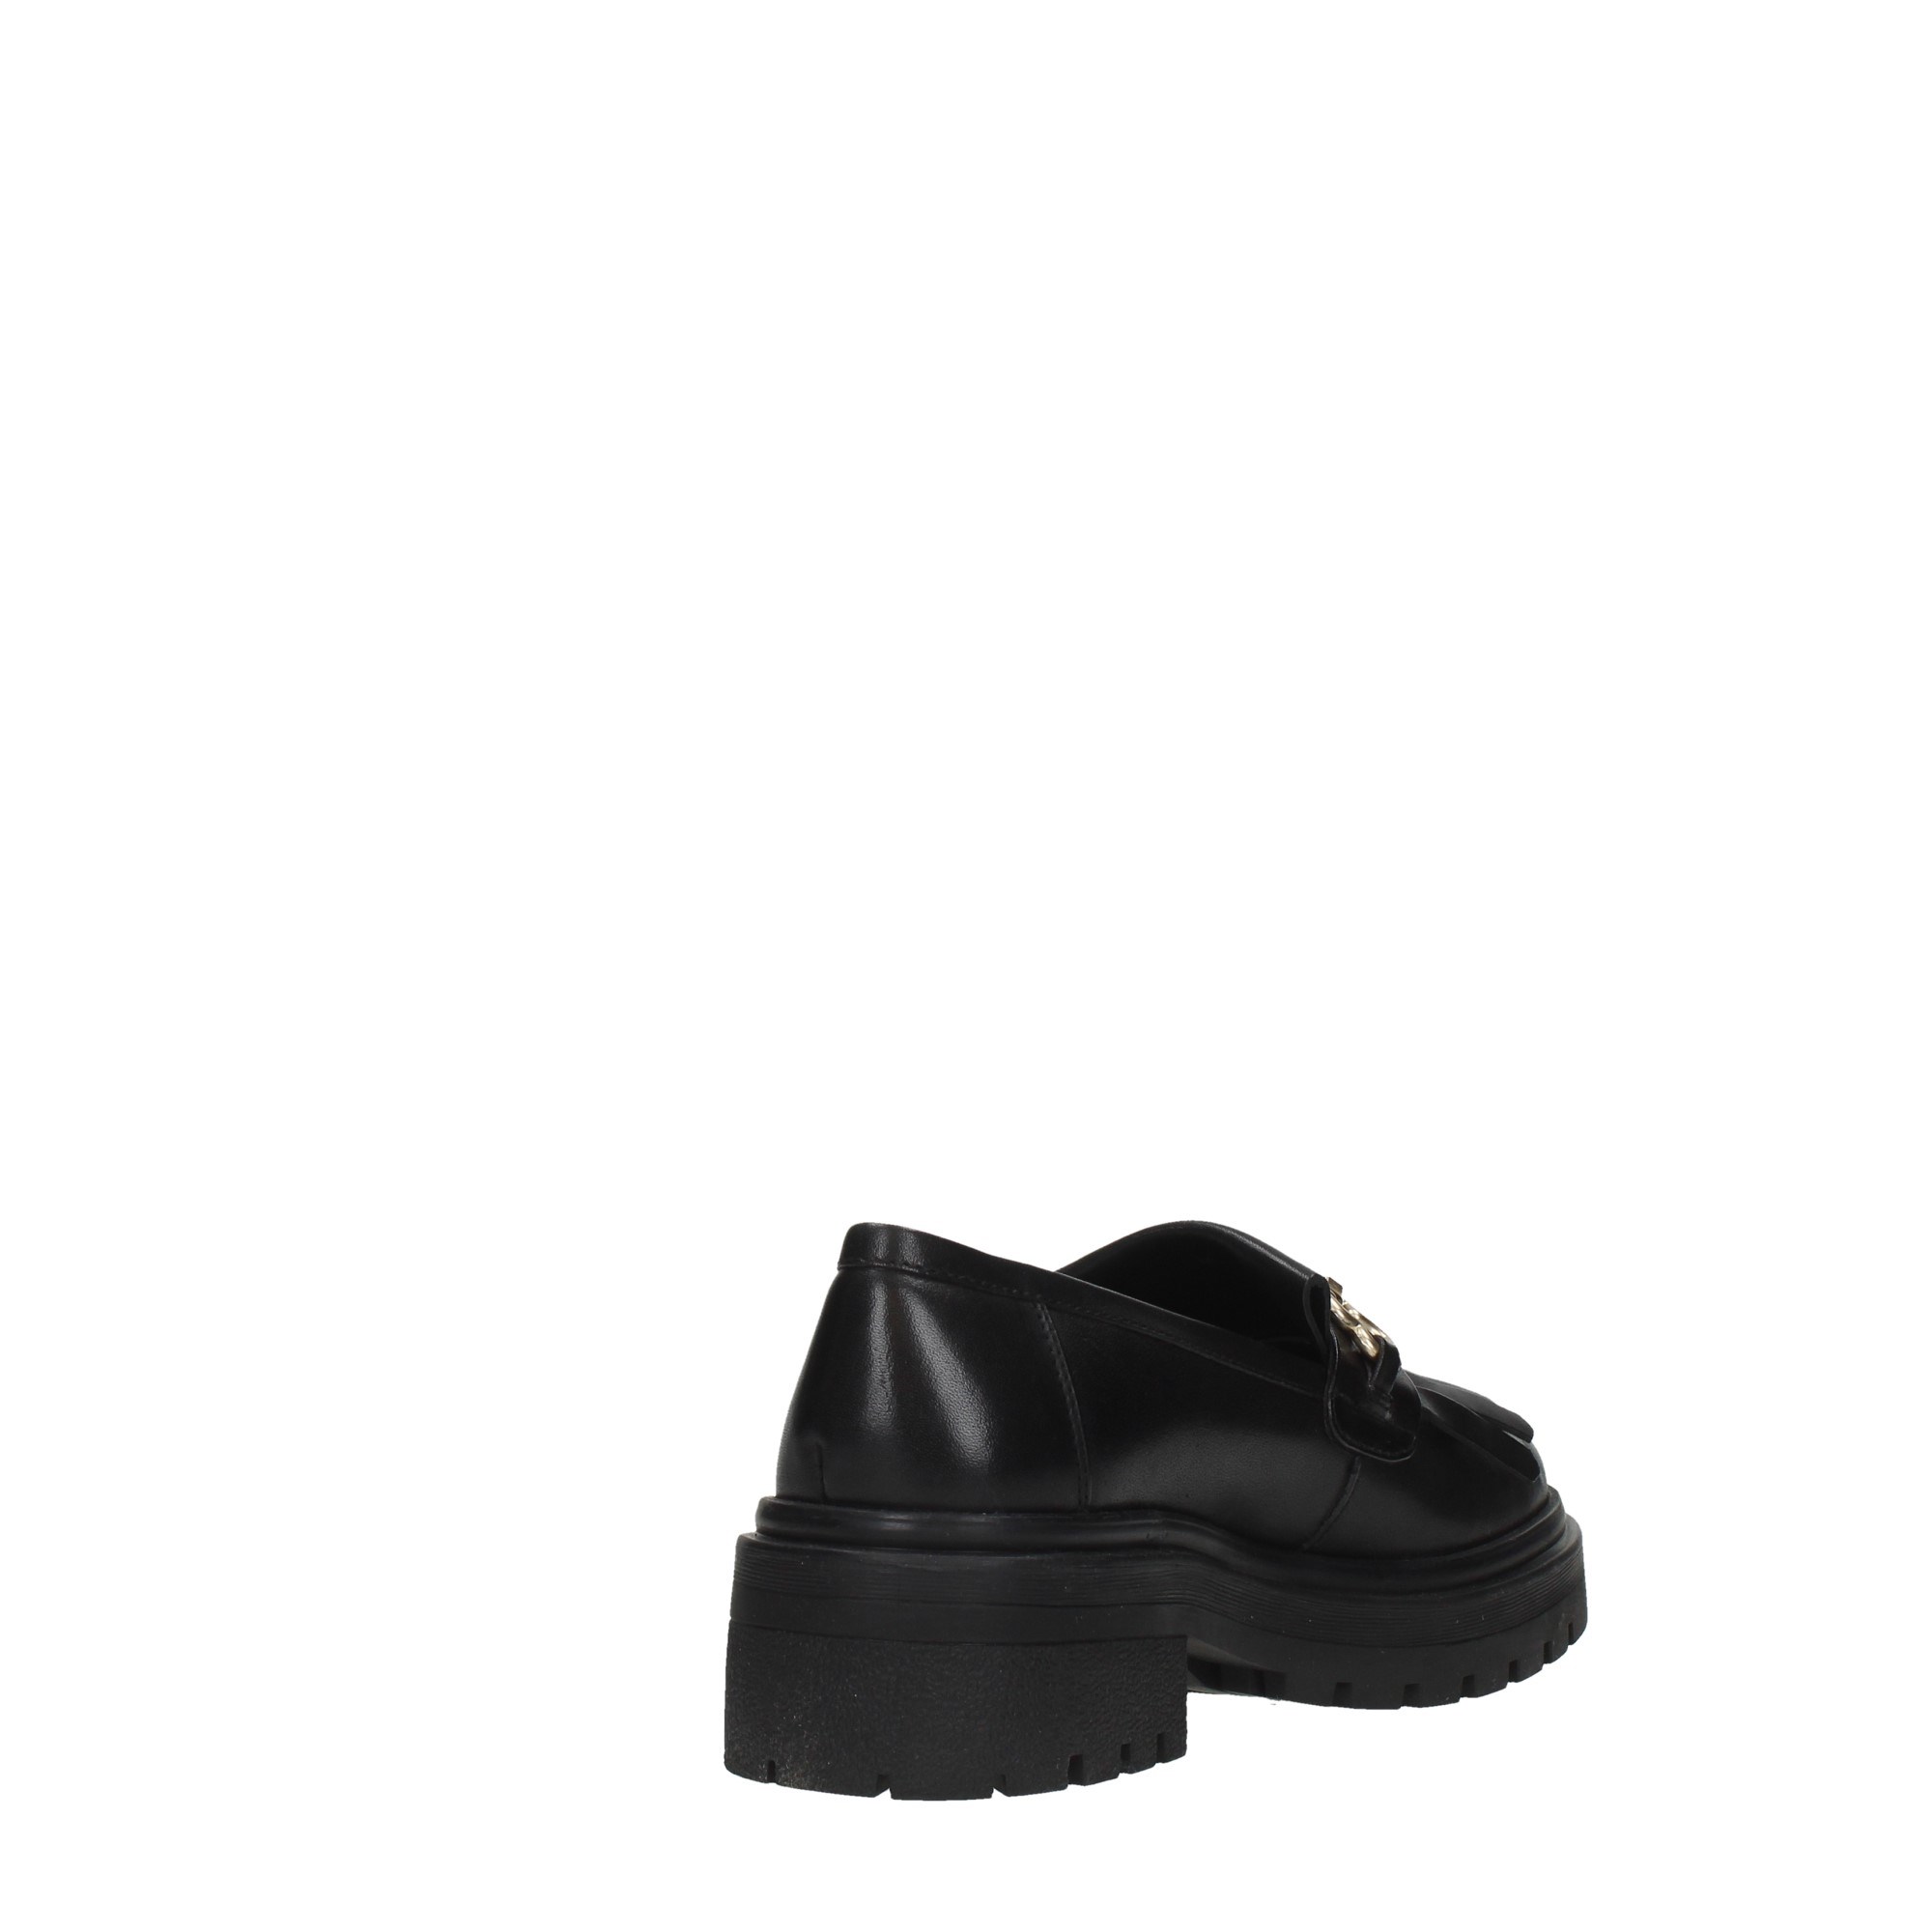 A P E P A Z Z A Shoes Women Moccasins And Slippers F2COMBATT33/LEA